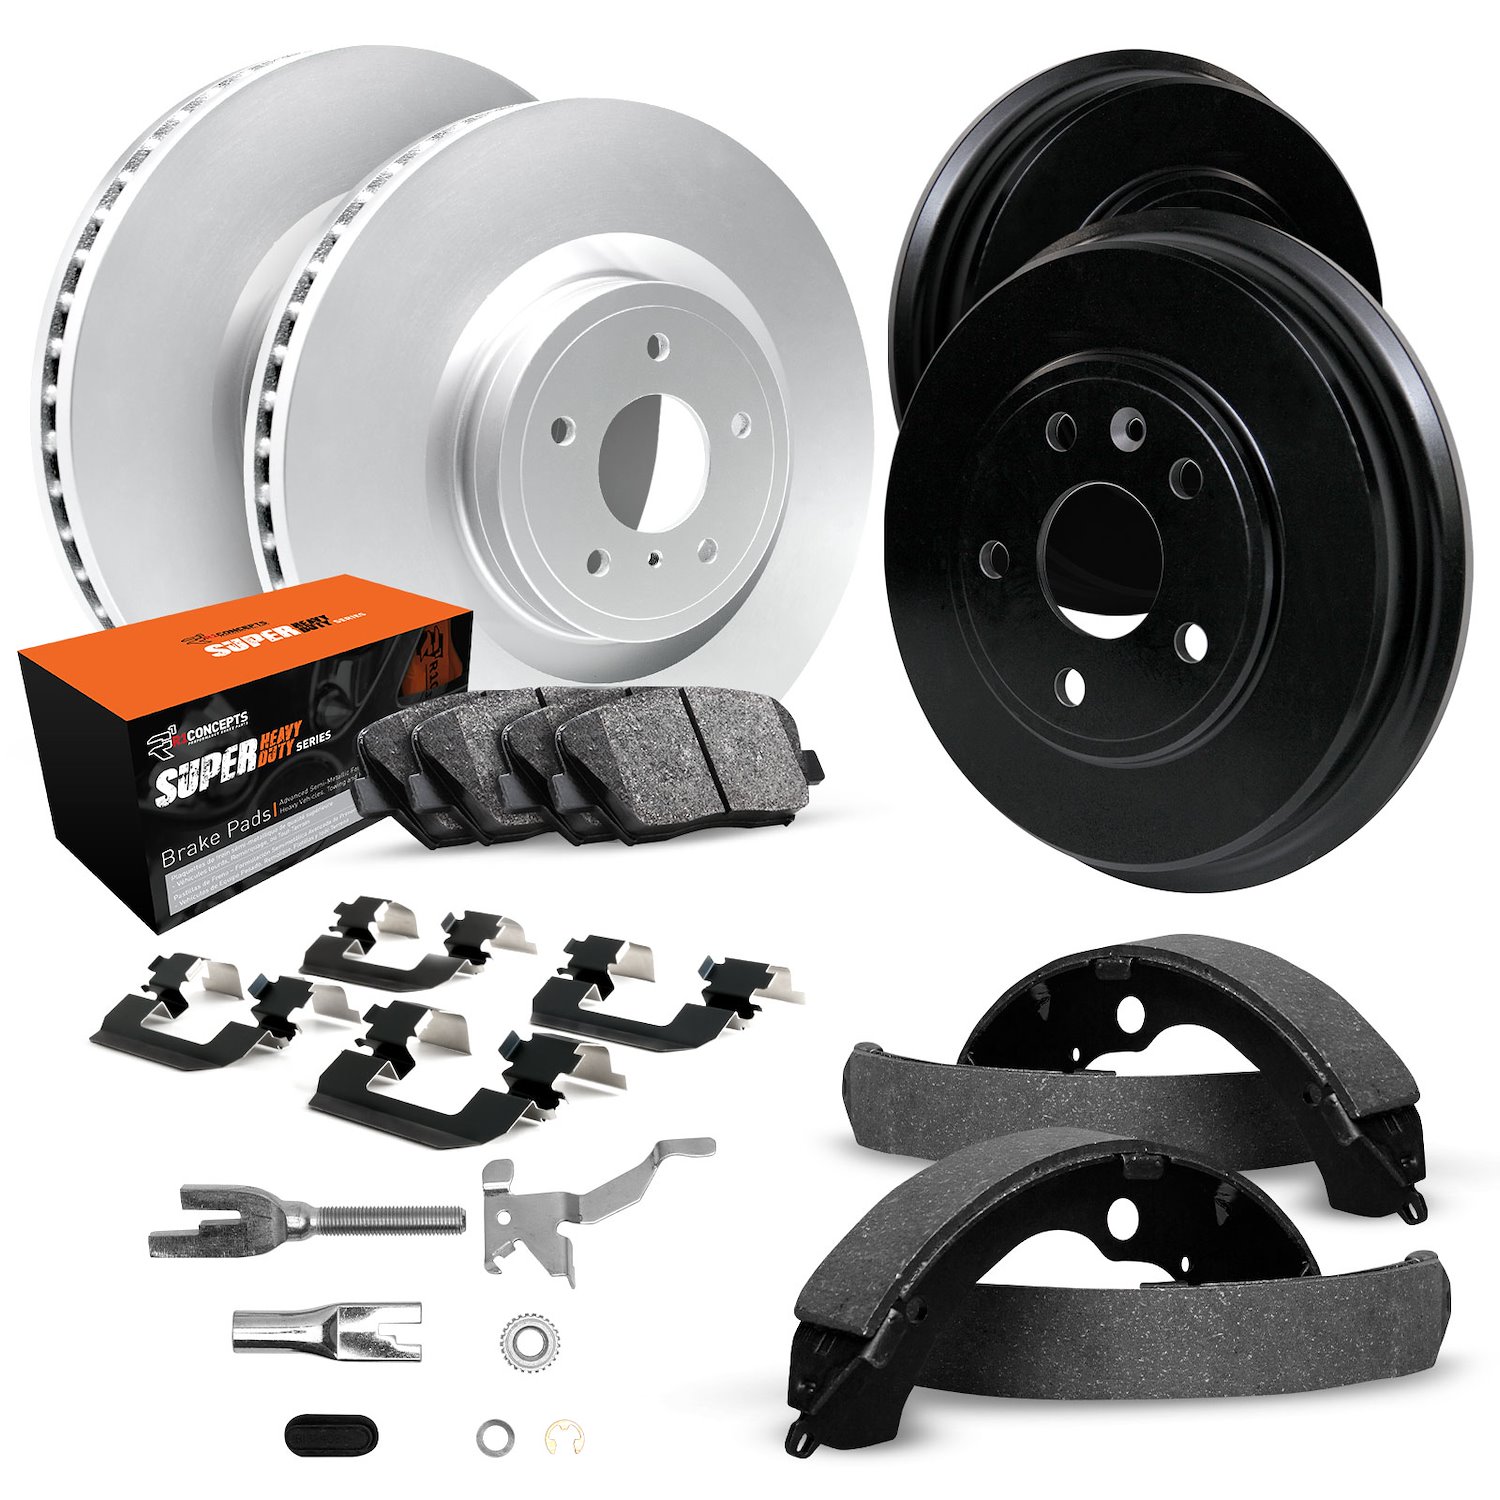 GEO-Carbon Brake Rotor & Drum Set w/Super-Duty Pads, Shoes, Hardware/Adjusters, 1983-1994 Ford/Lincoln/Mercury/Mazda